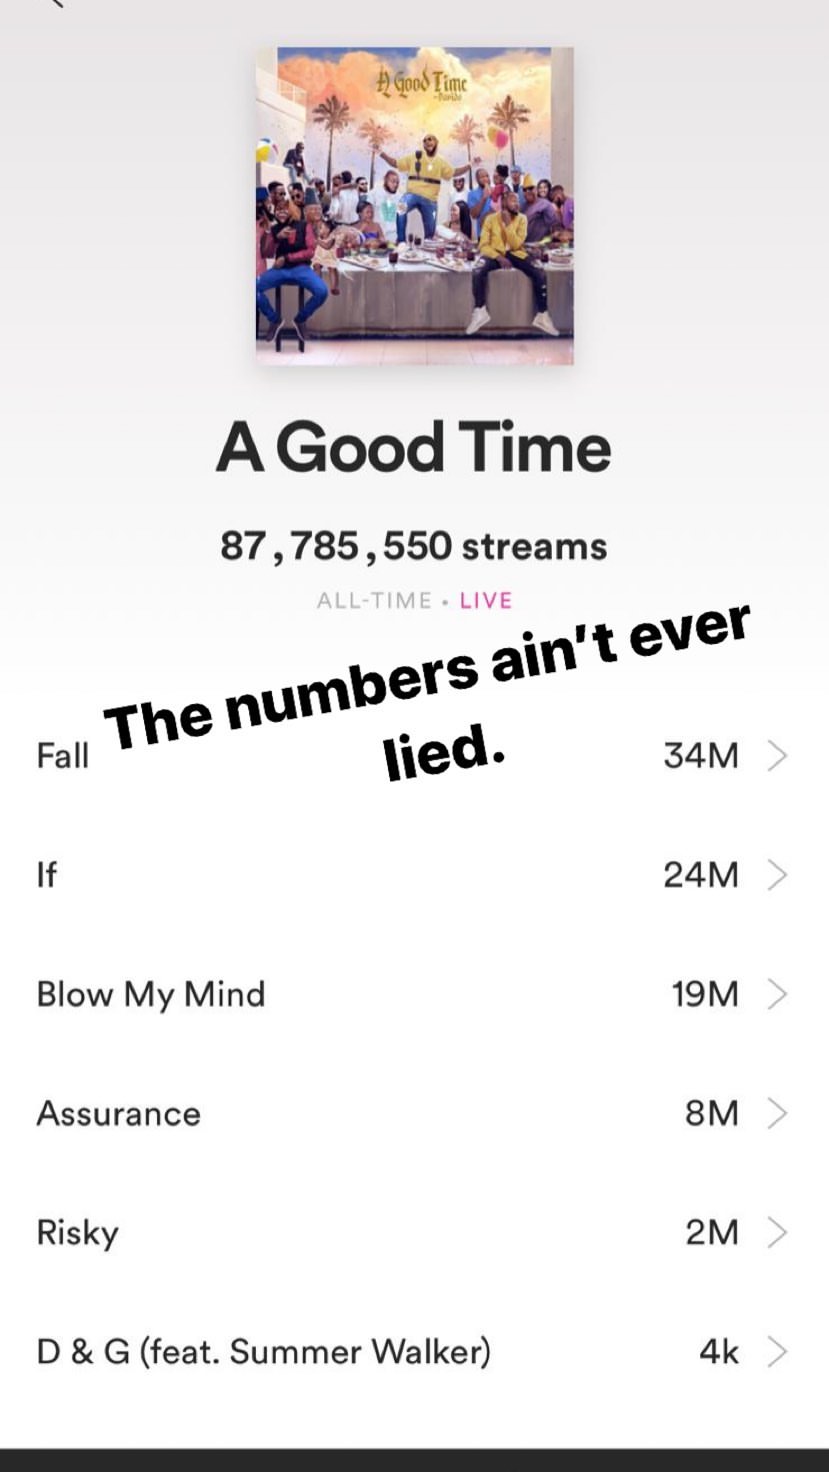 Davido's New Album 'A Good Time' hits 87 million streams, topping charts in 38 countries (Photo)